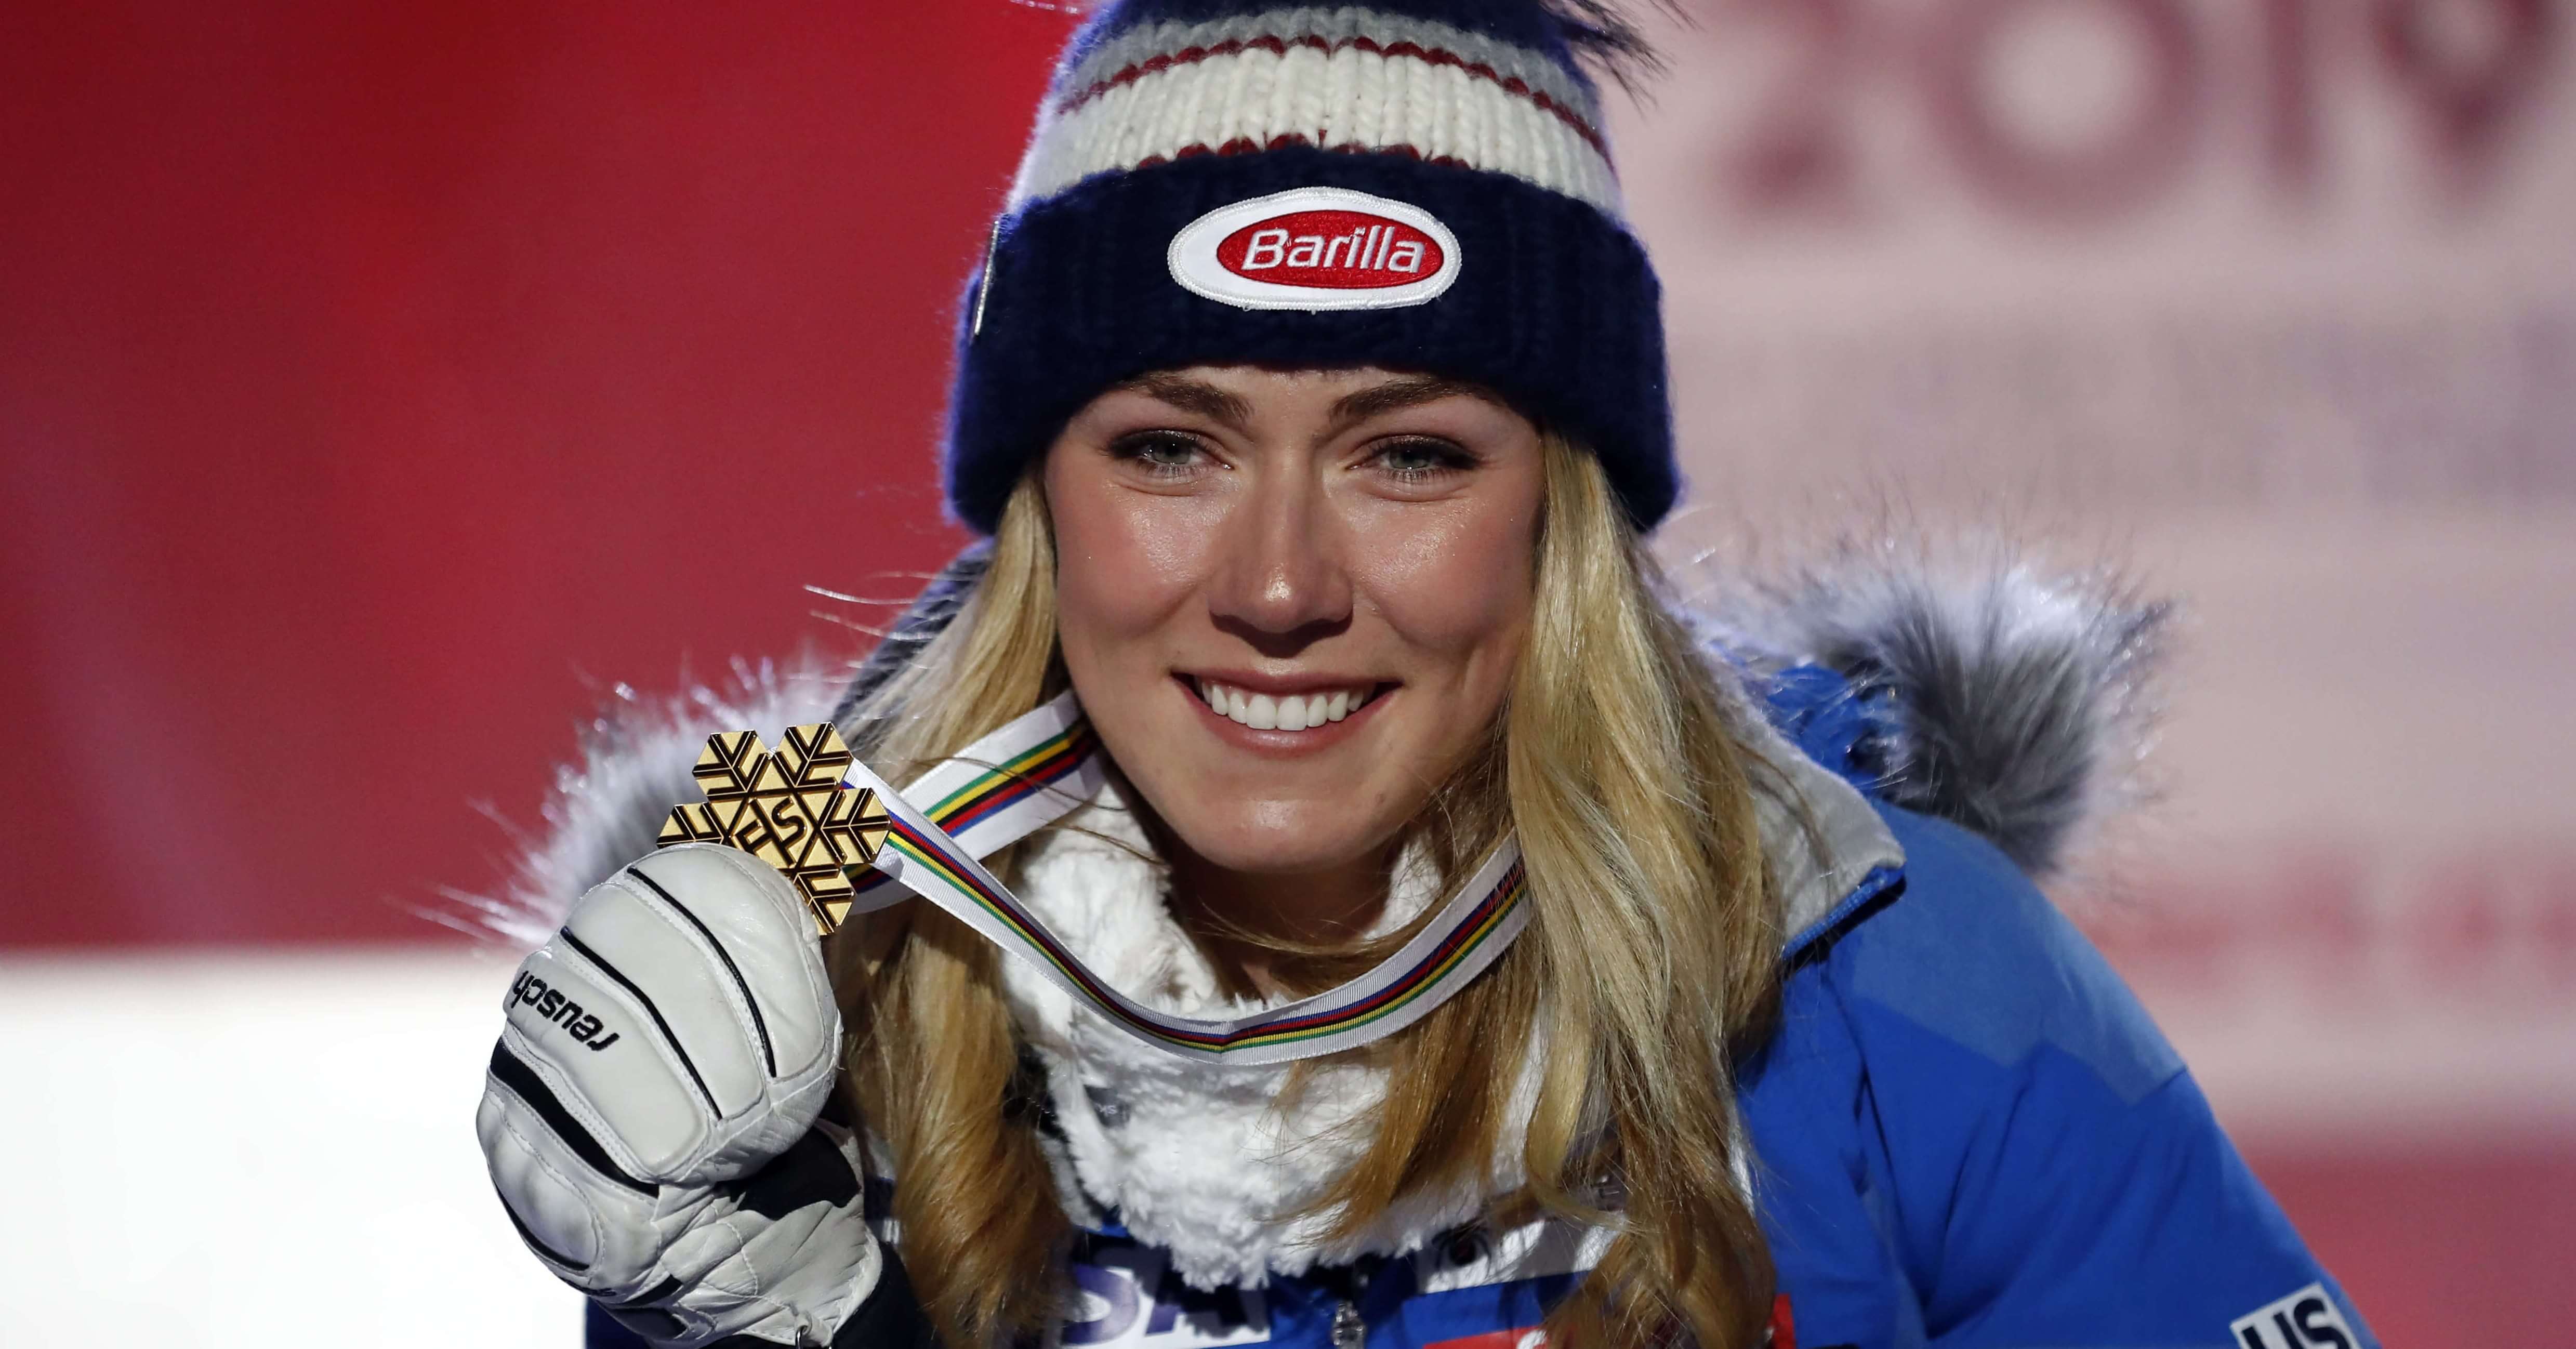 Mikaela Shiffrin poses with her gold medal in the women's super-G at the alpine ski World Championships in Are, Sweden, on Tuesday.